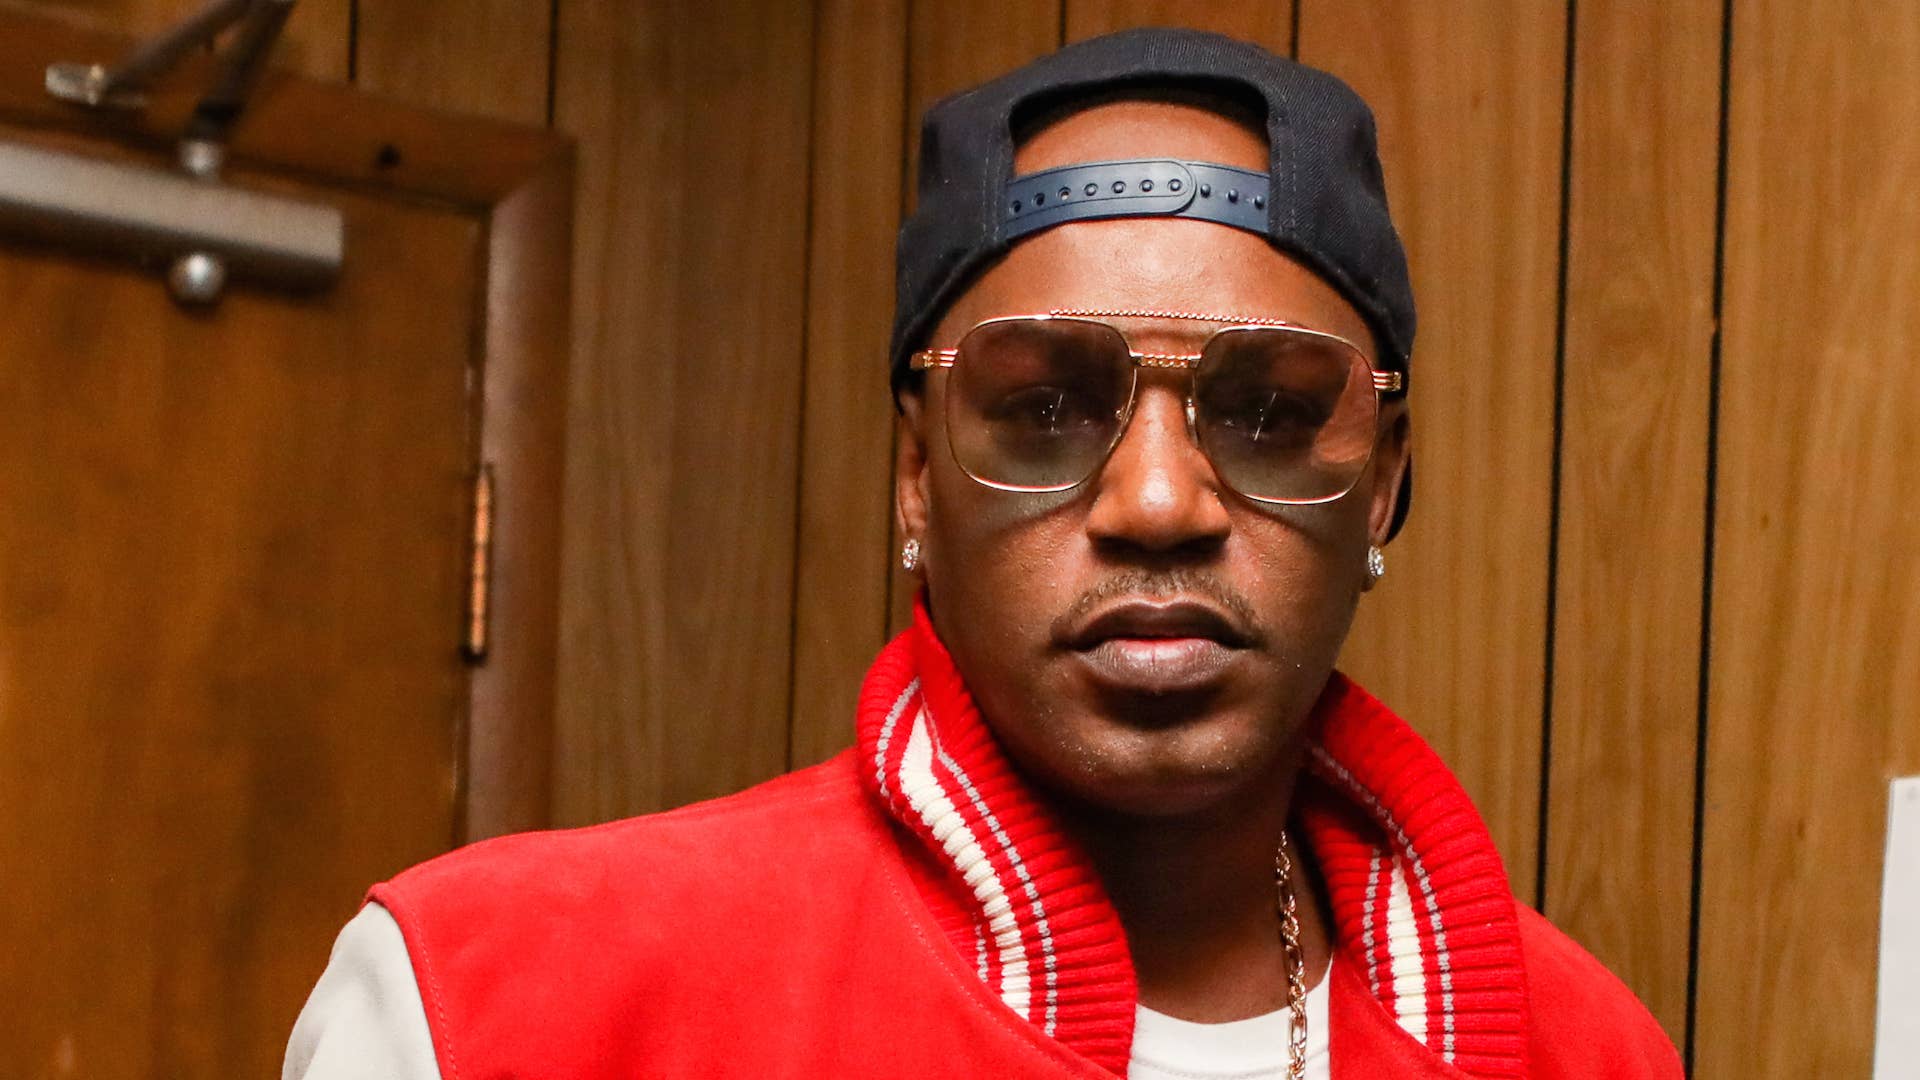 Cam'ron performs at The Basement East